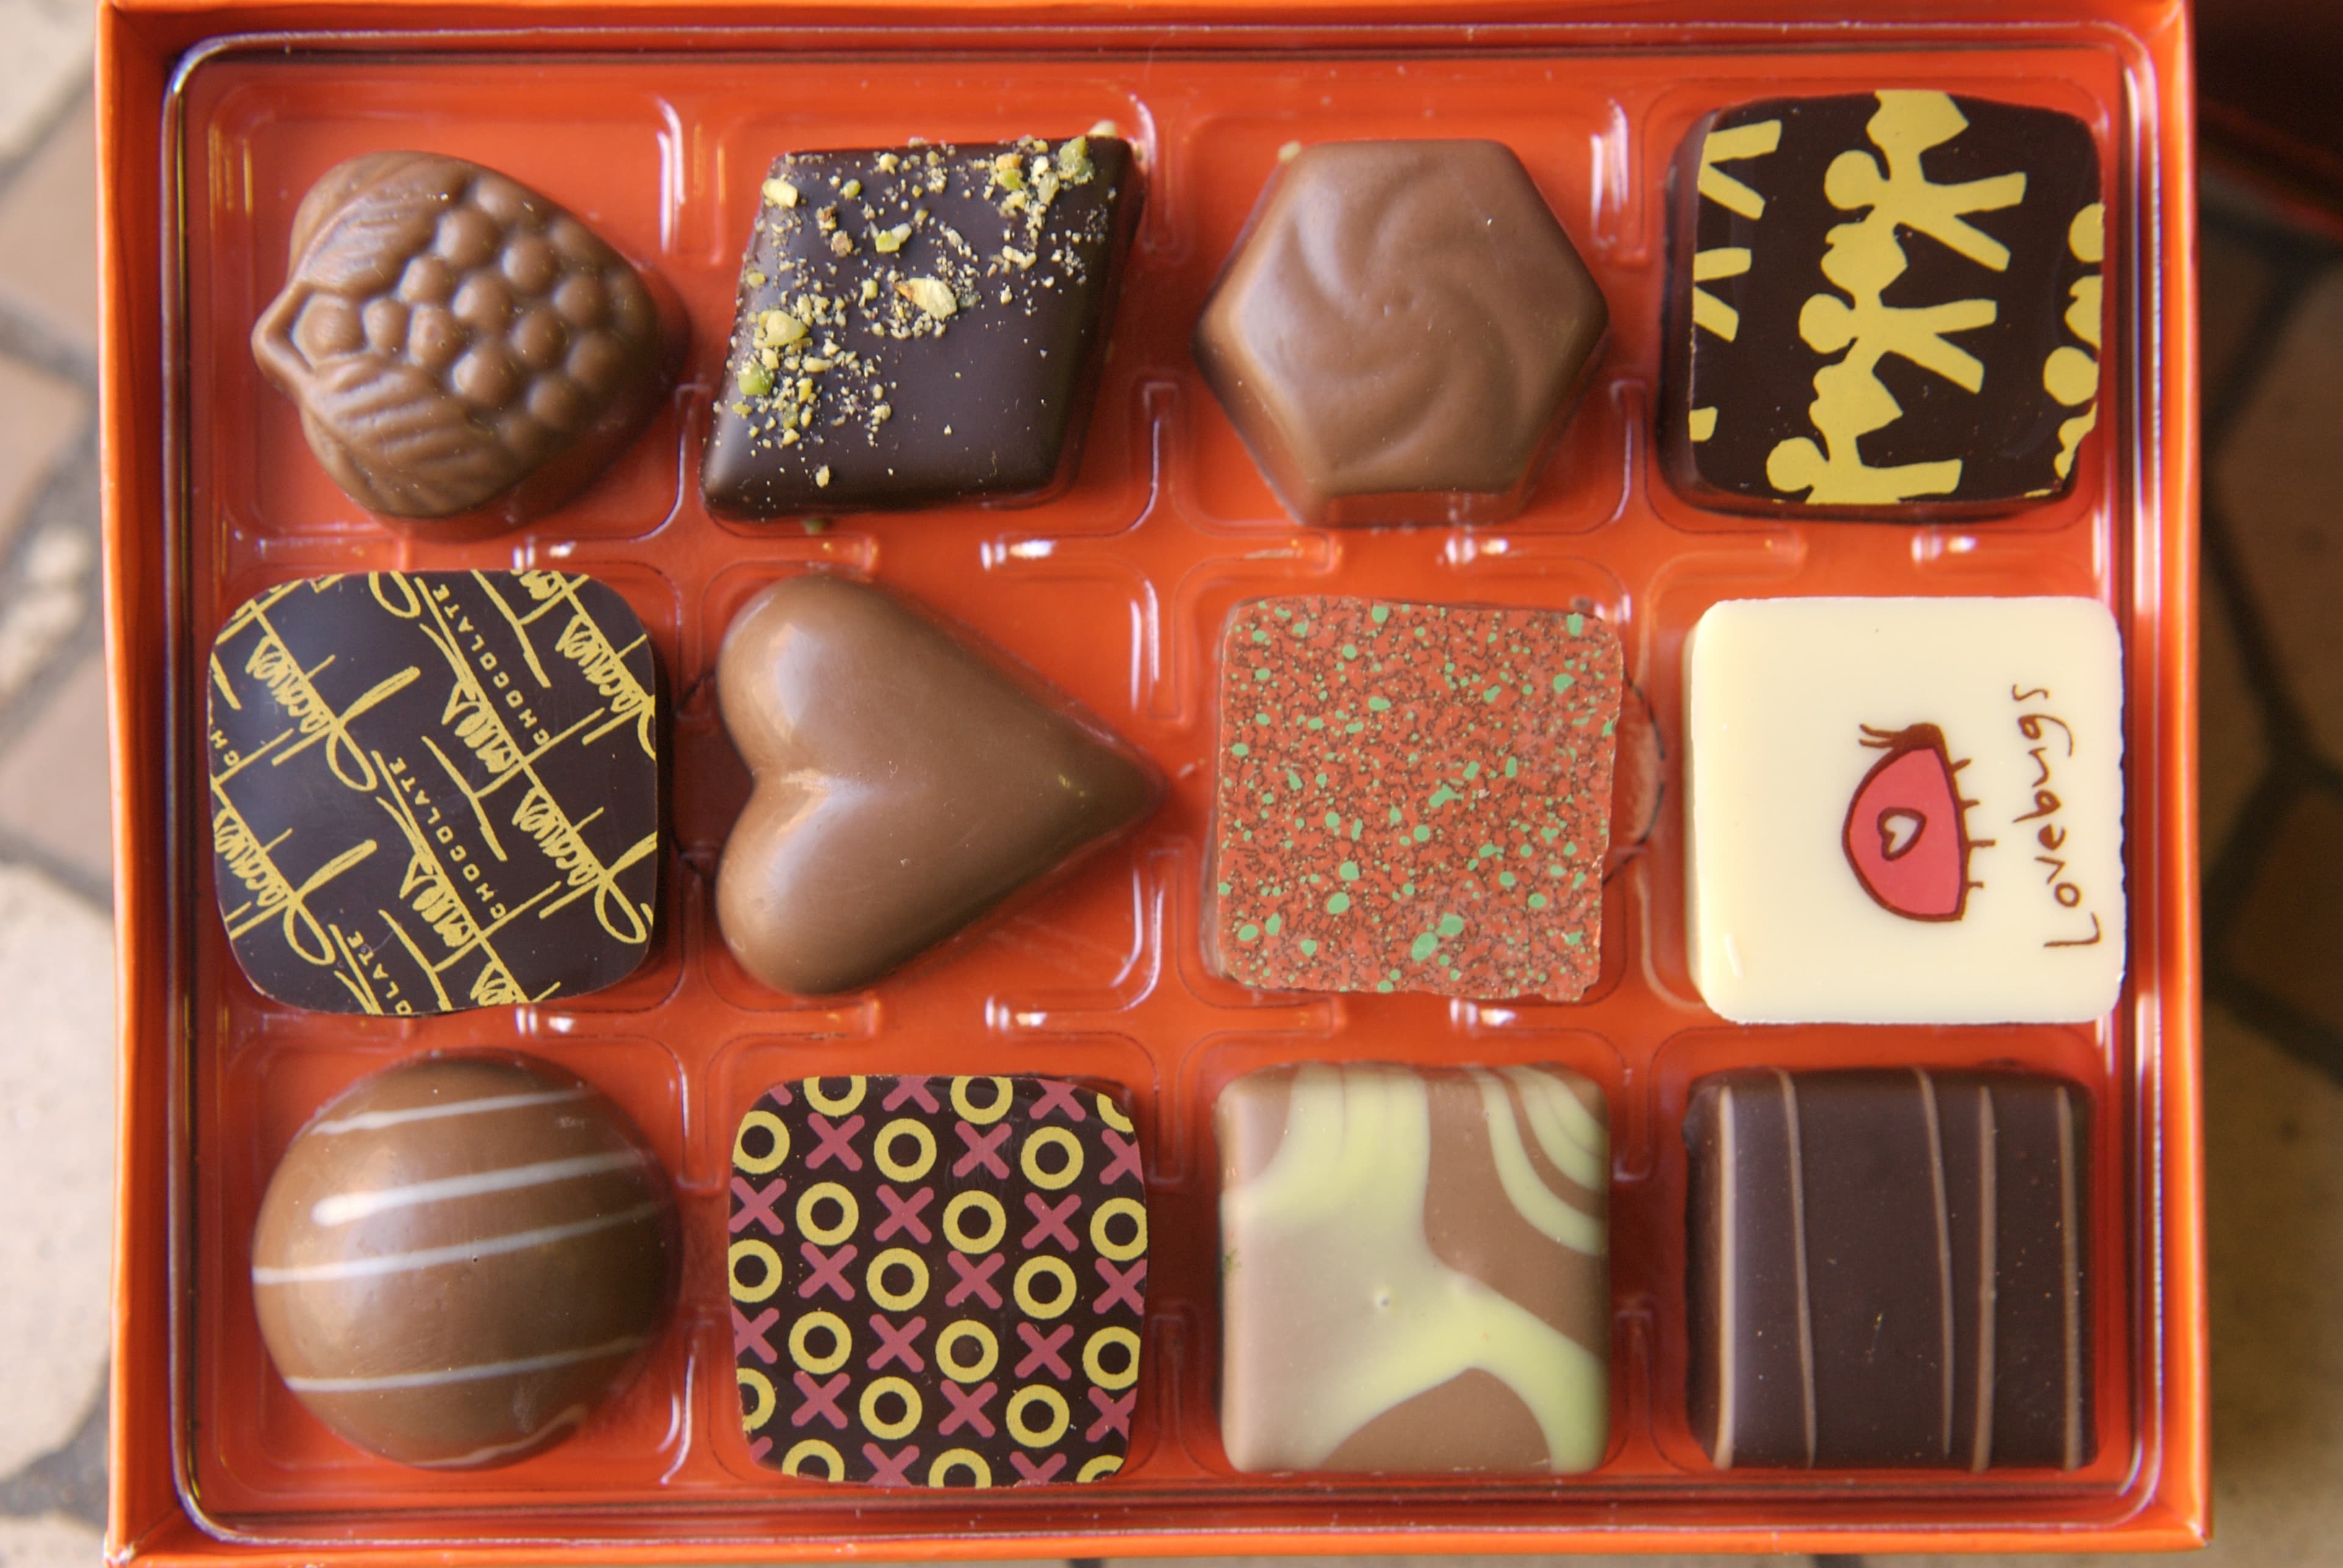 Selection of Jacques Torres Chocolates, Brooklyn.